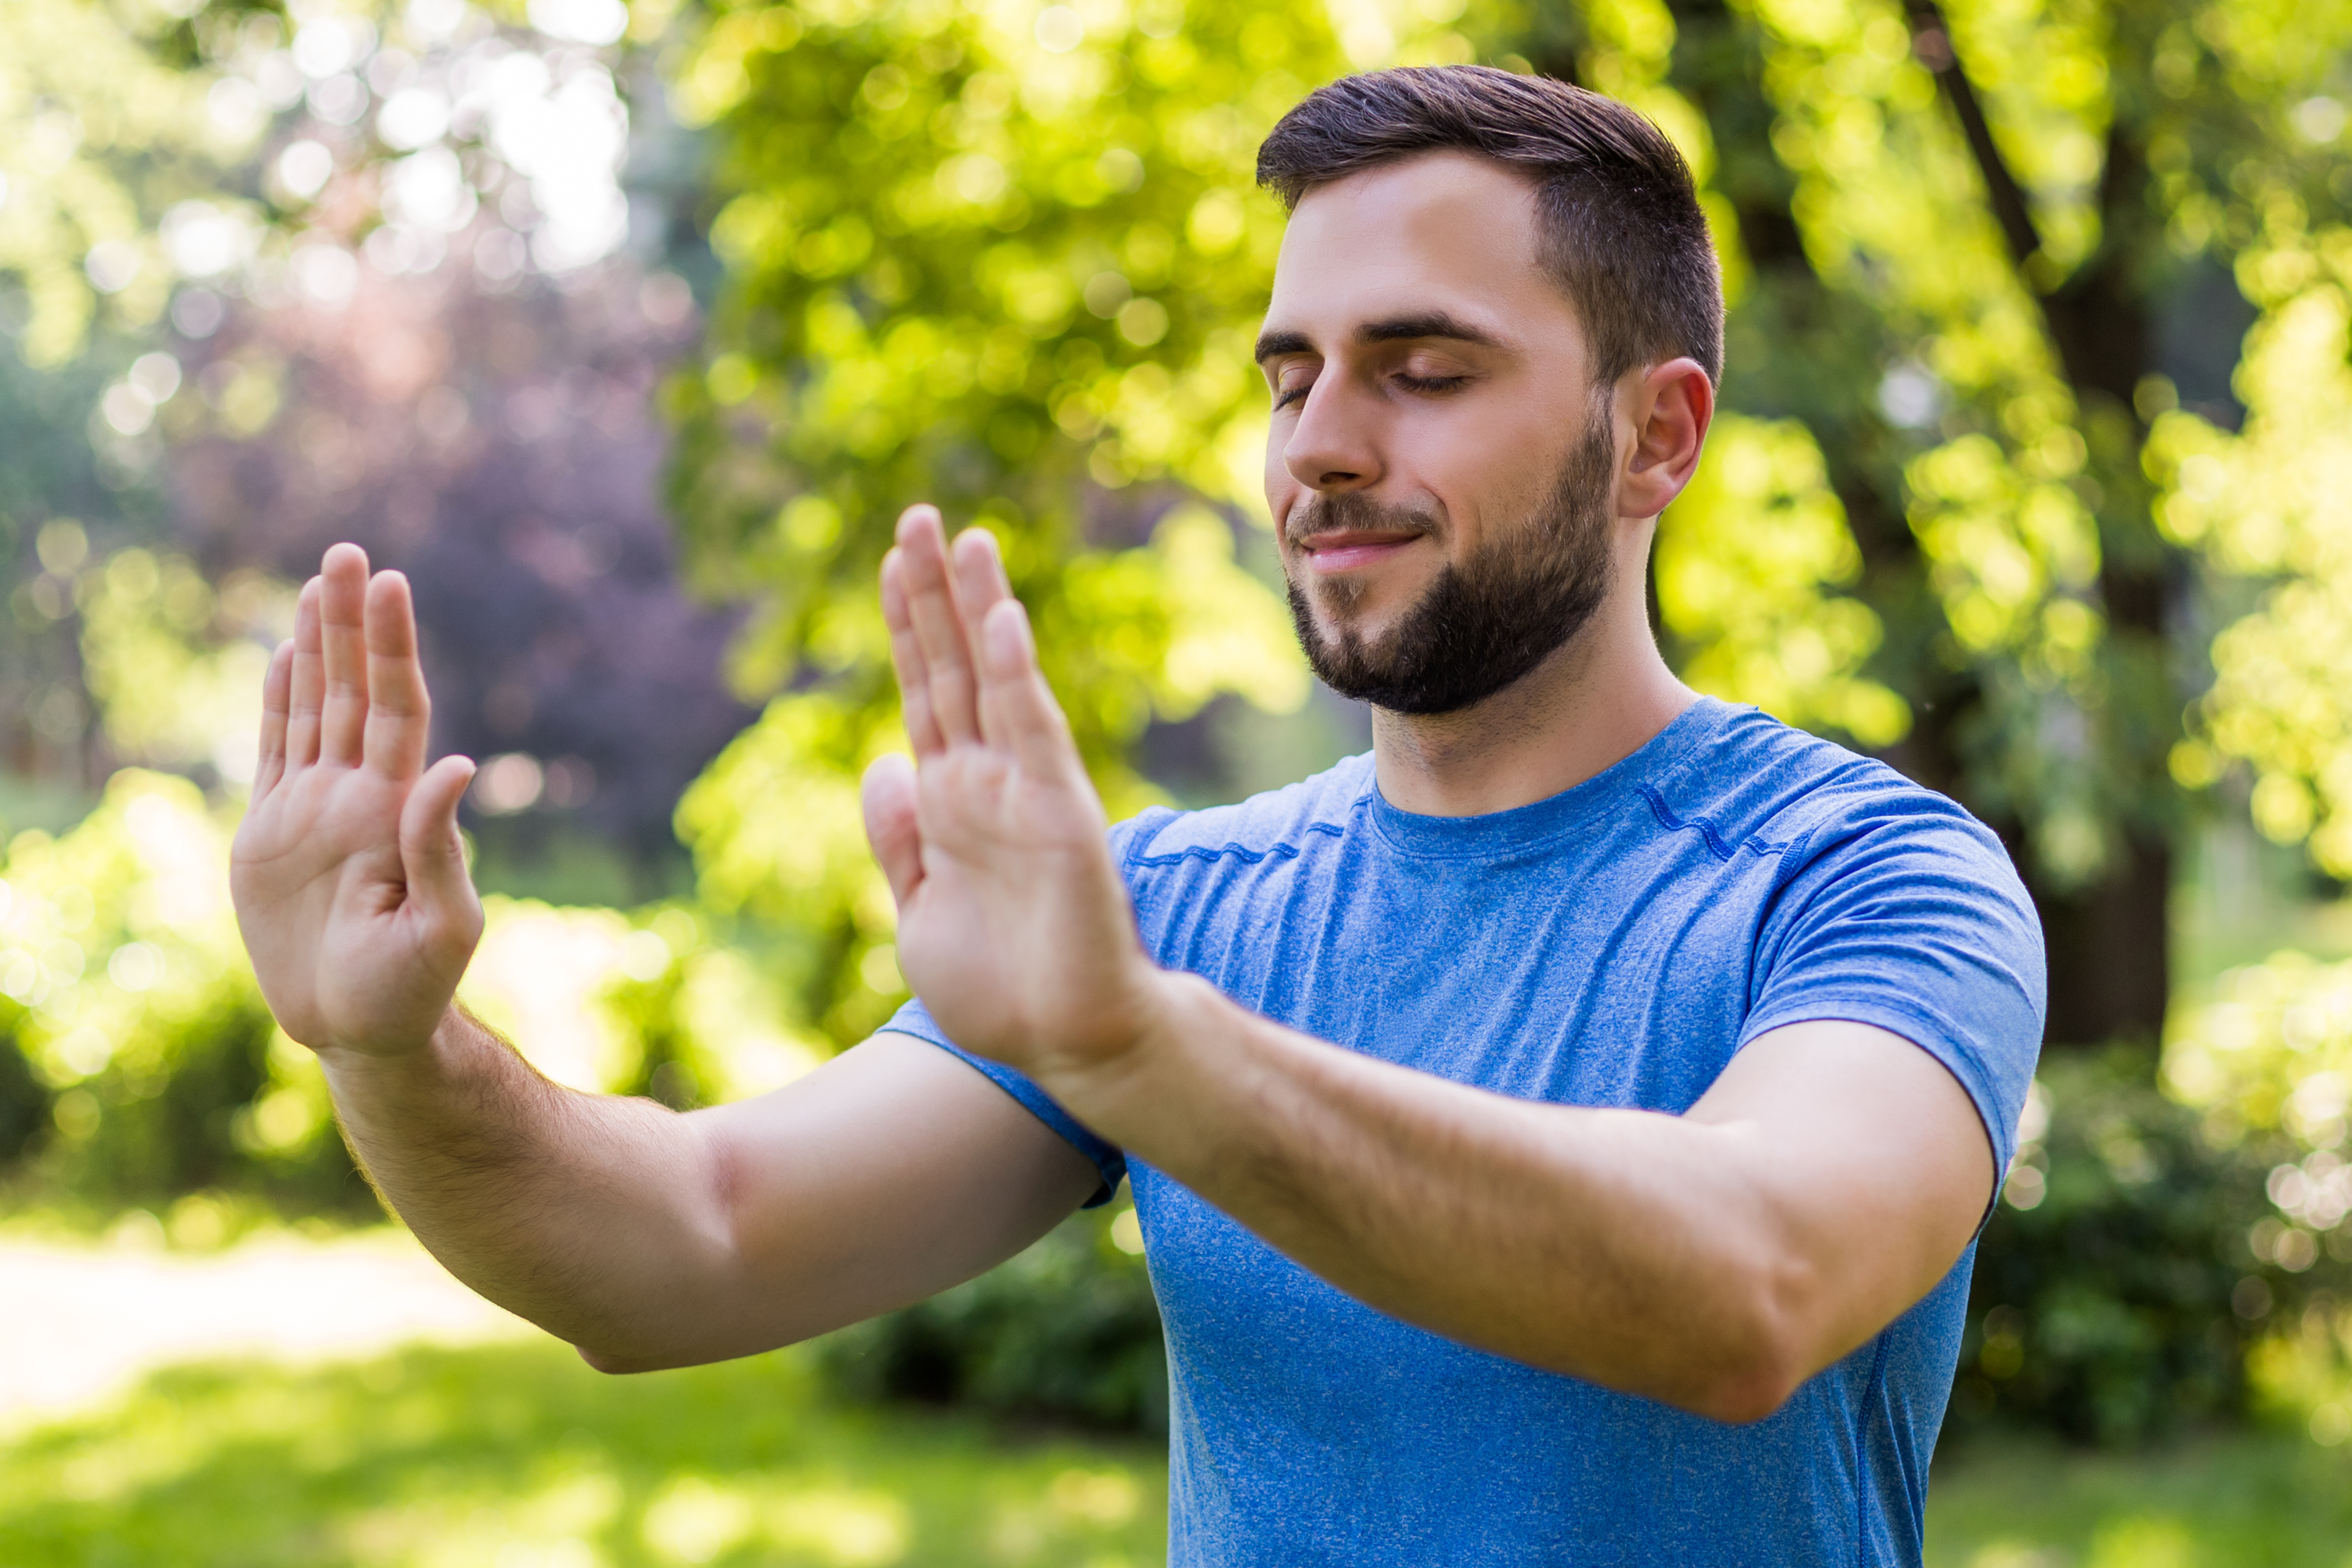 Tai Chi Beginners: 3 Moves to Bring Calm to Stressful Days